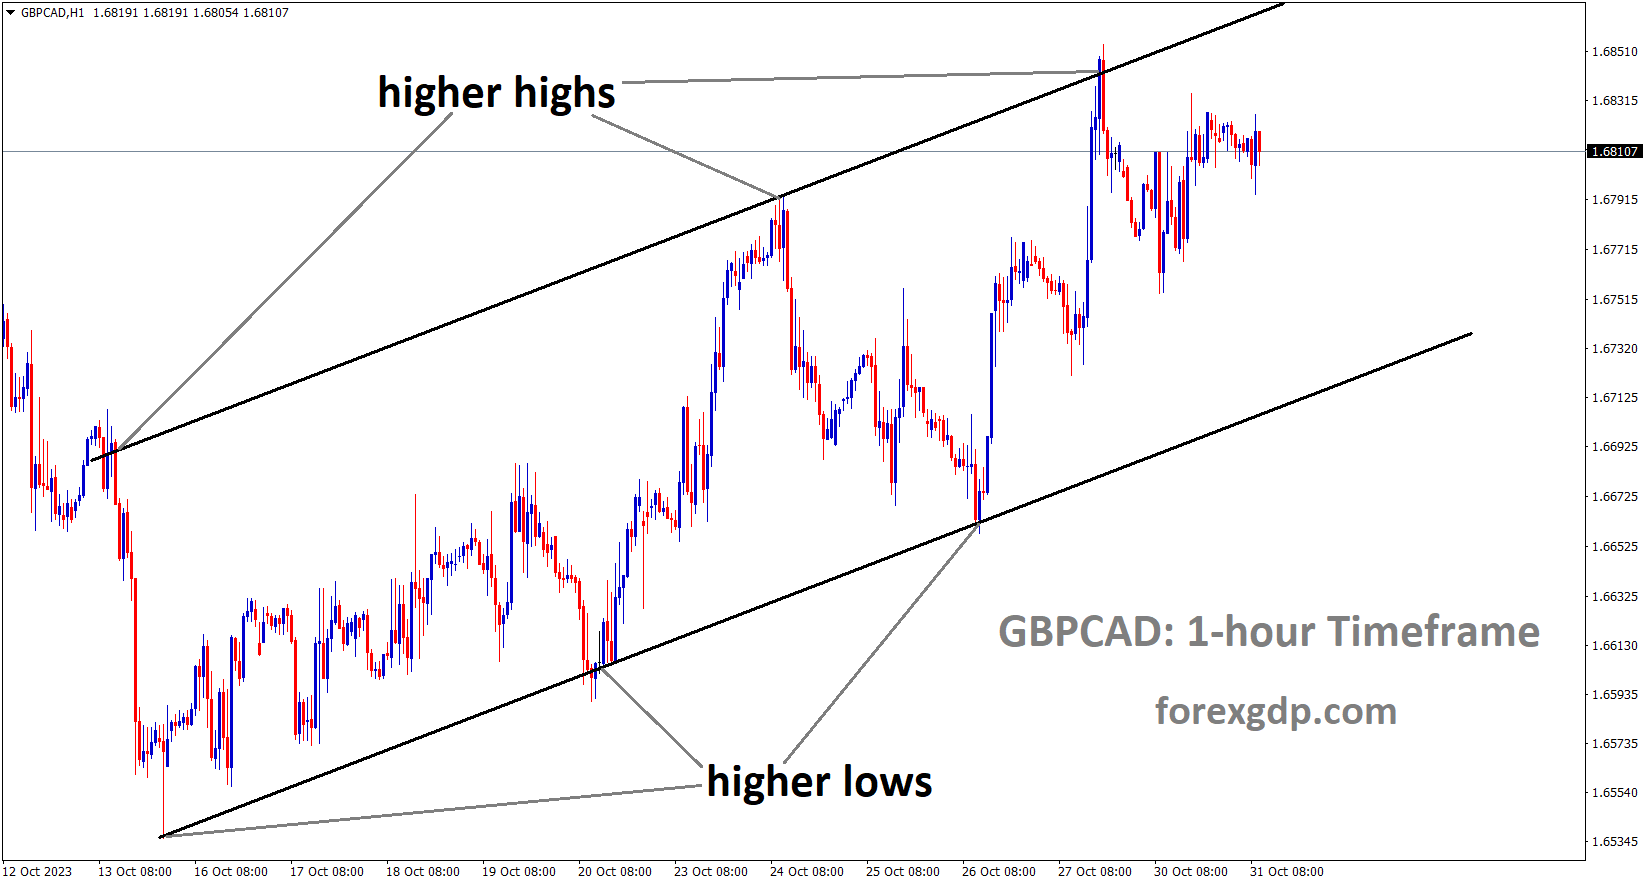 GBPCAD is moving in an Ascending channel and the market has reached the higher high area of the channel